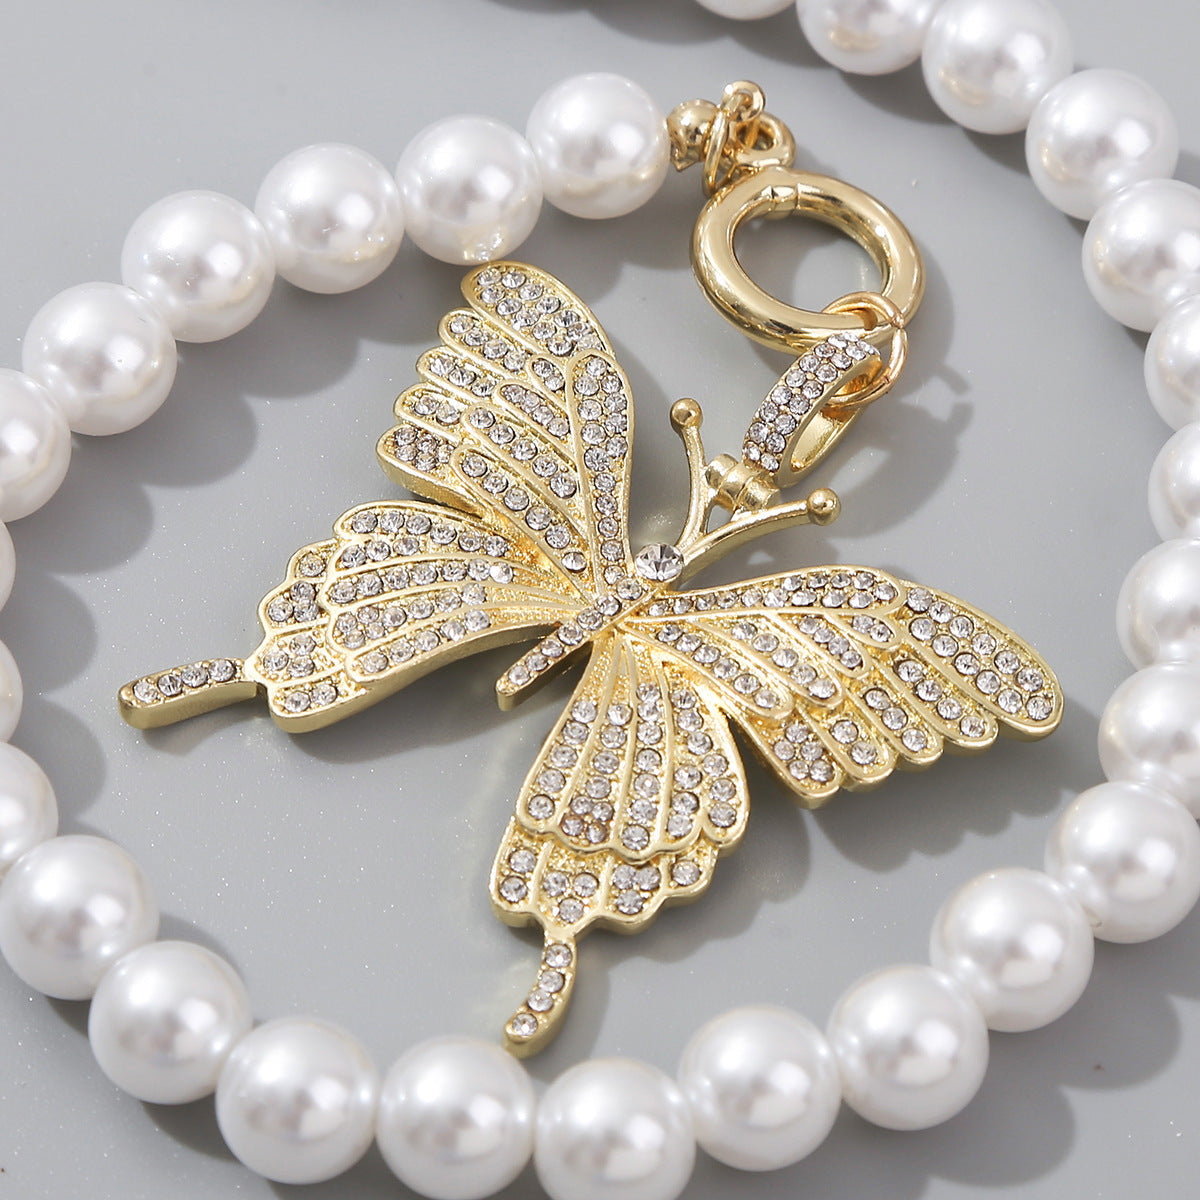 Pearl Butterfly Clavicle Necklace